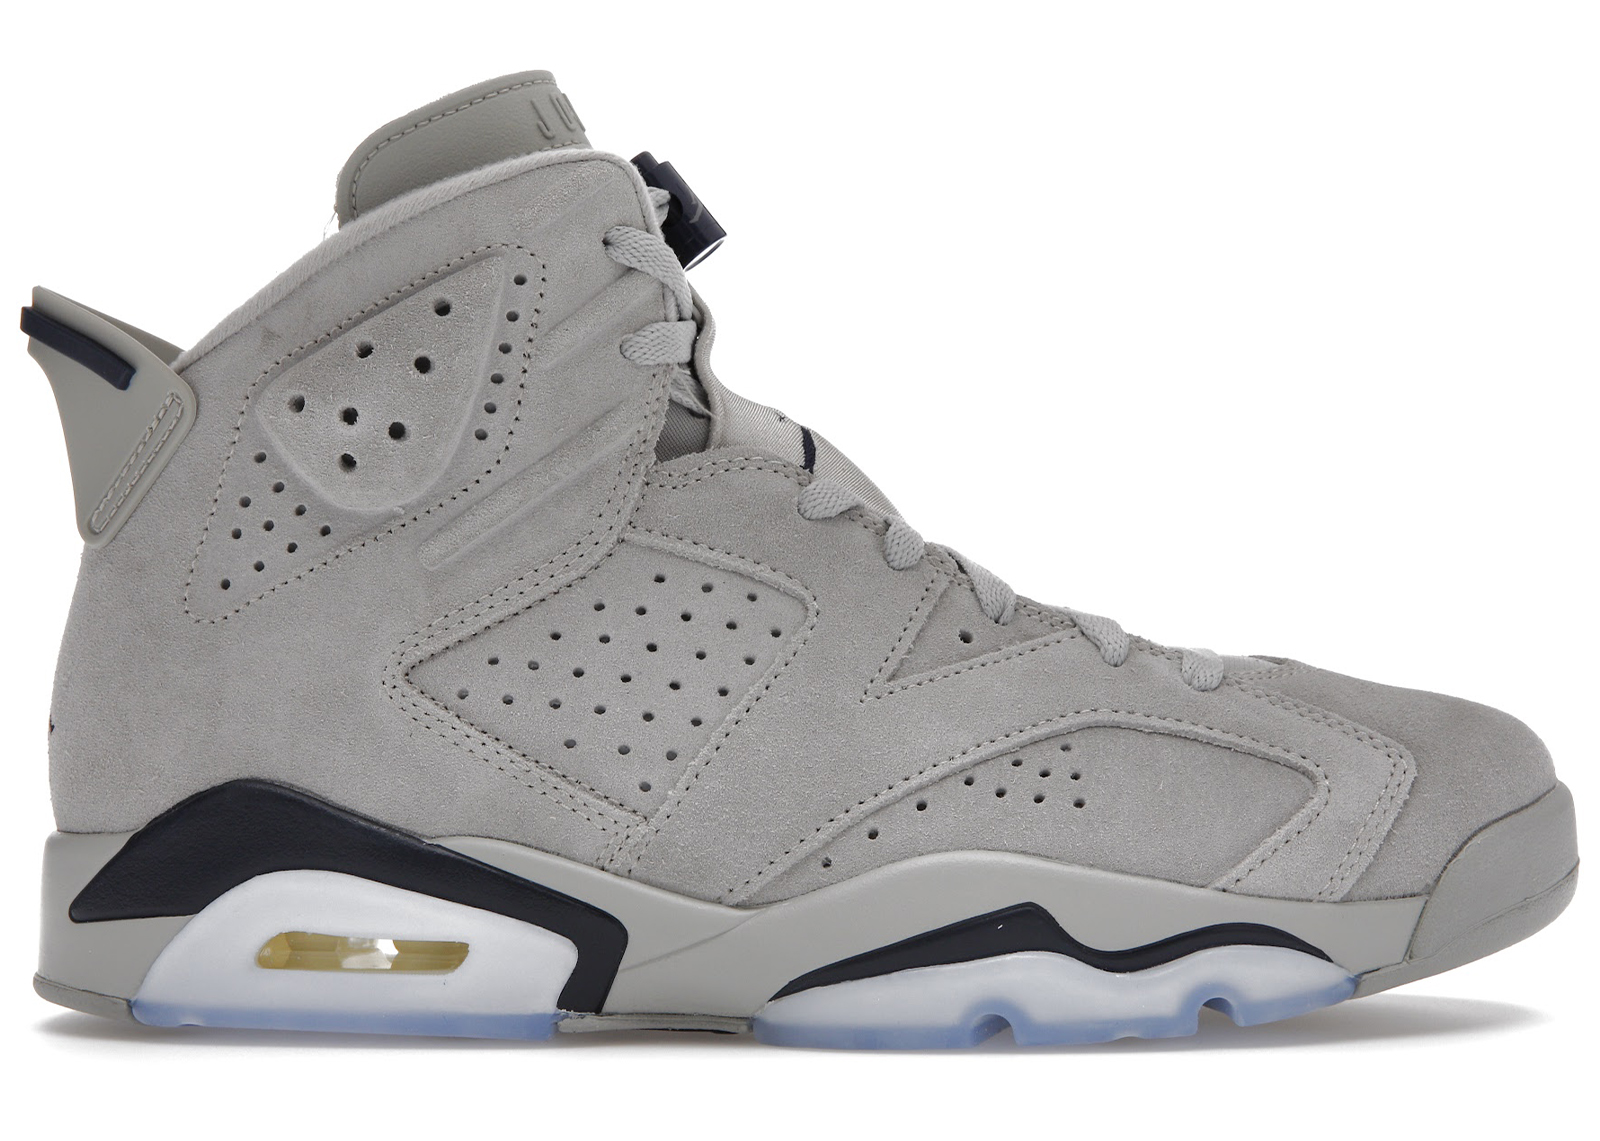 Jordan 6 - All Sizes & Colorways from $70 at StockX